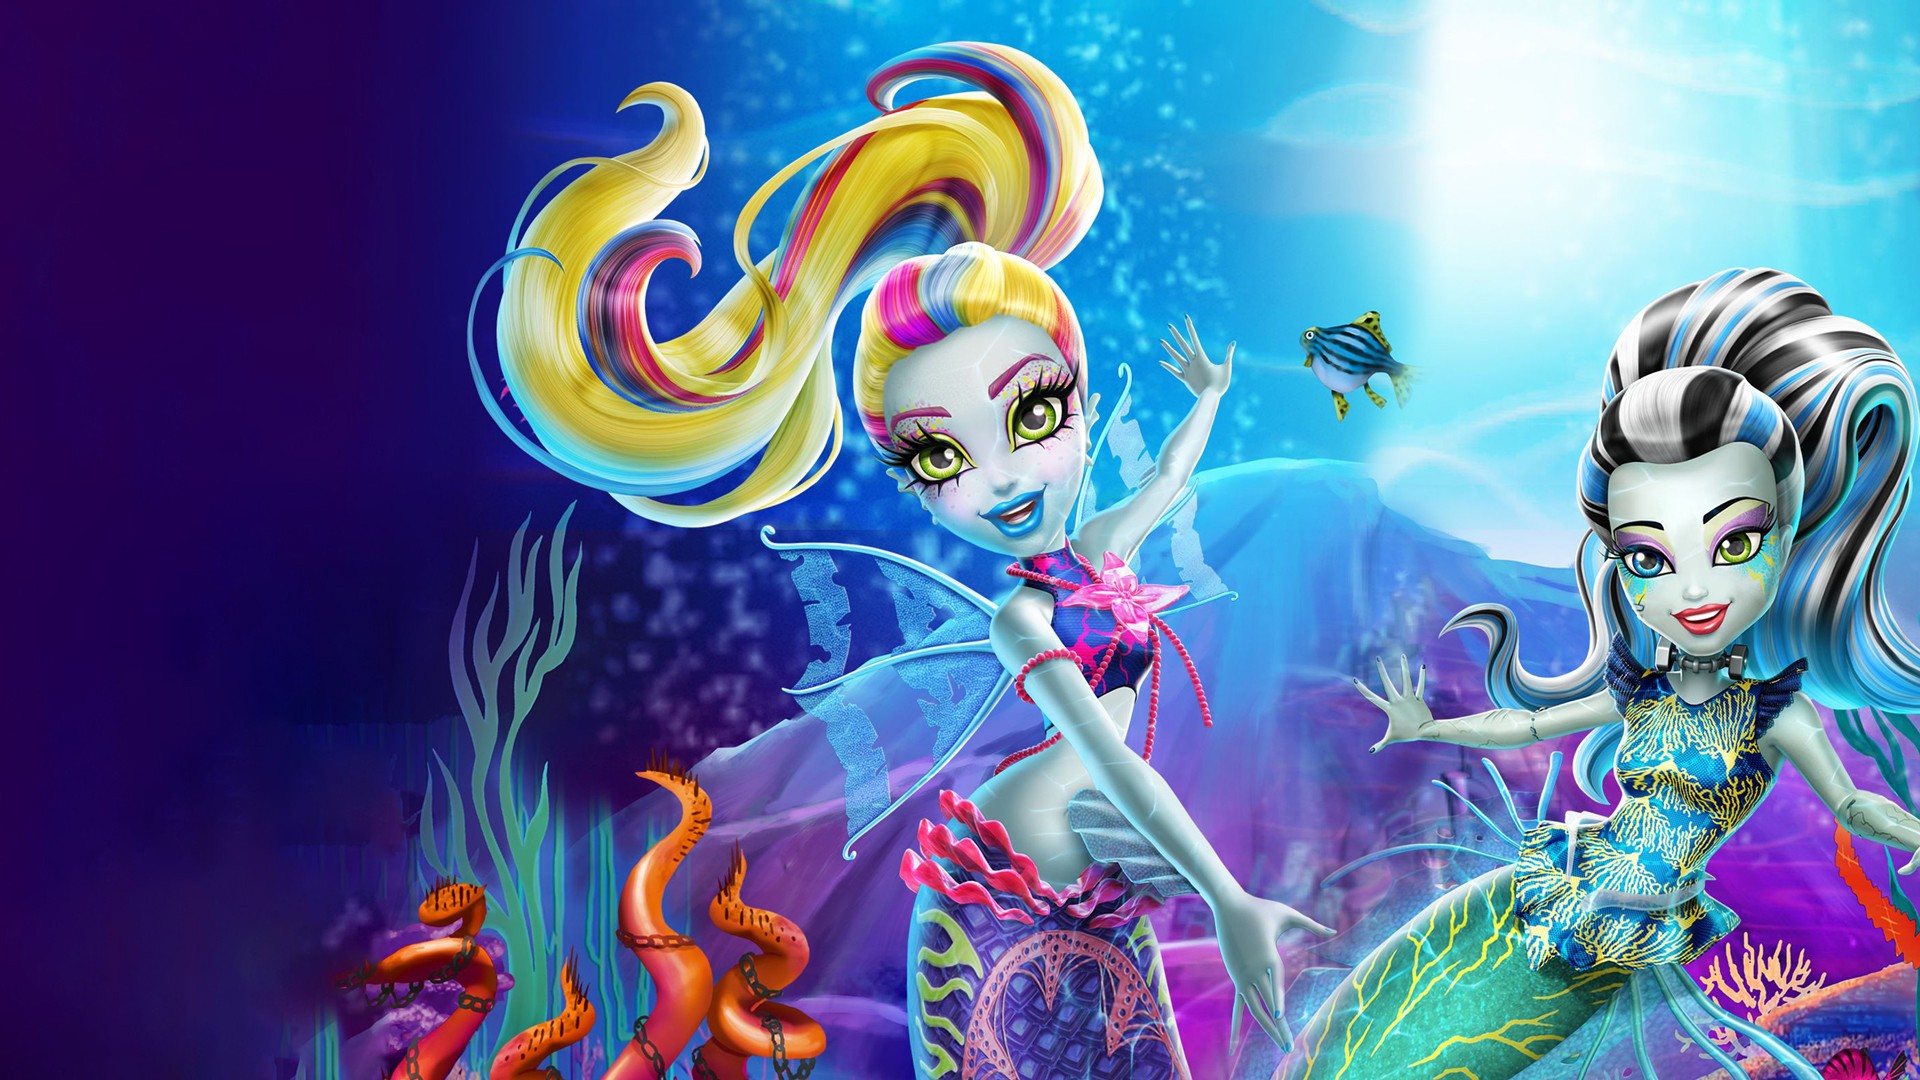 Monster High: The Great Scarrier Reef